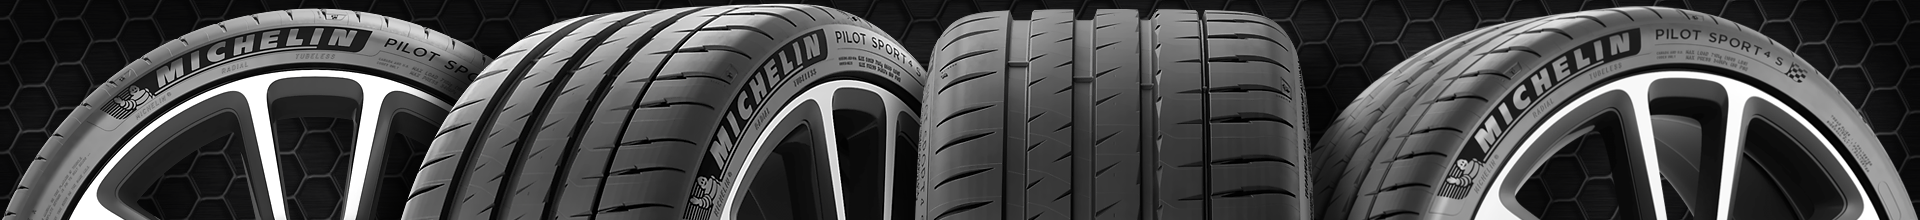 275 23 24 discount tires from Tire Outlet US